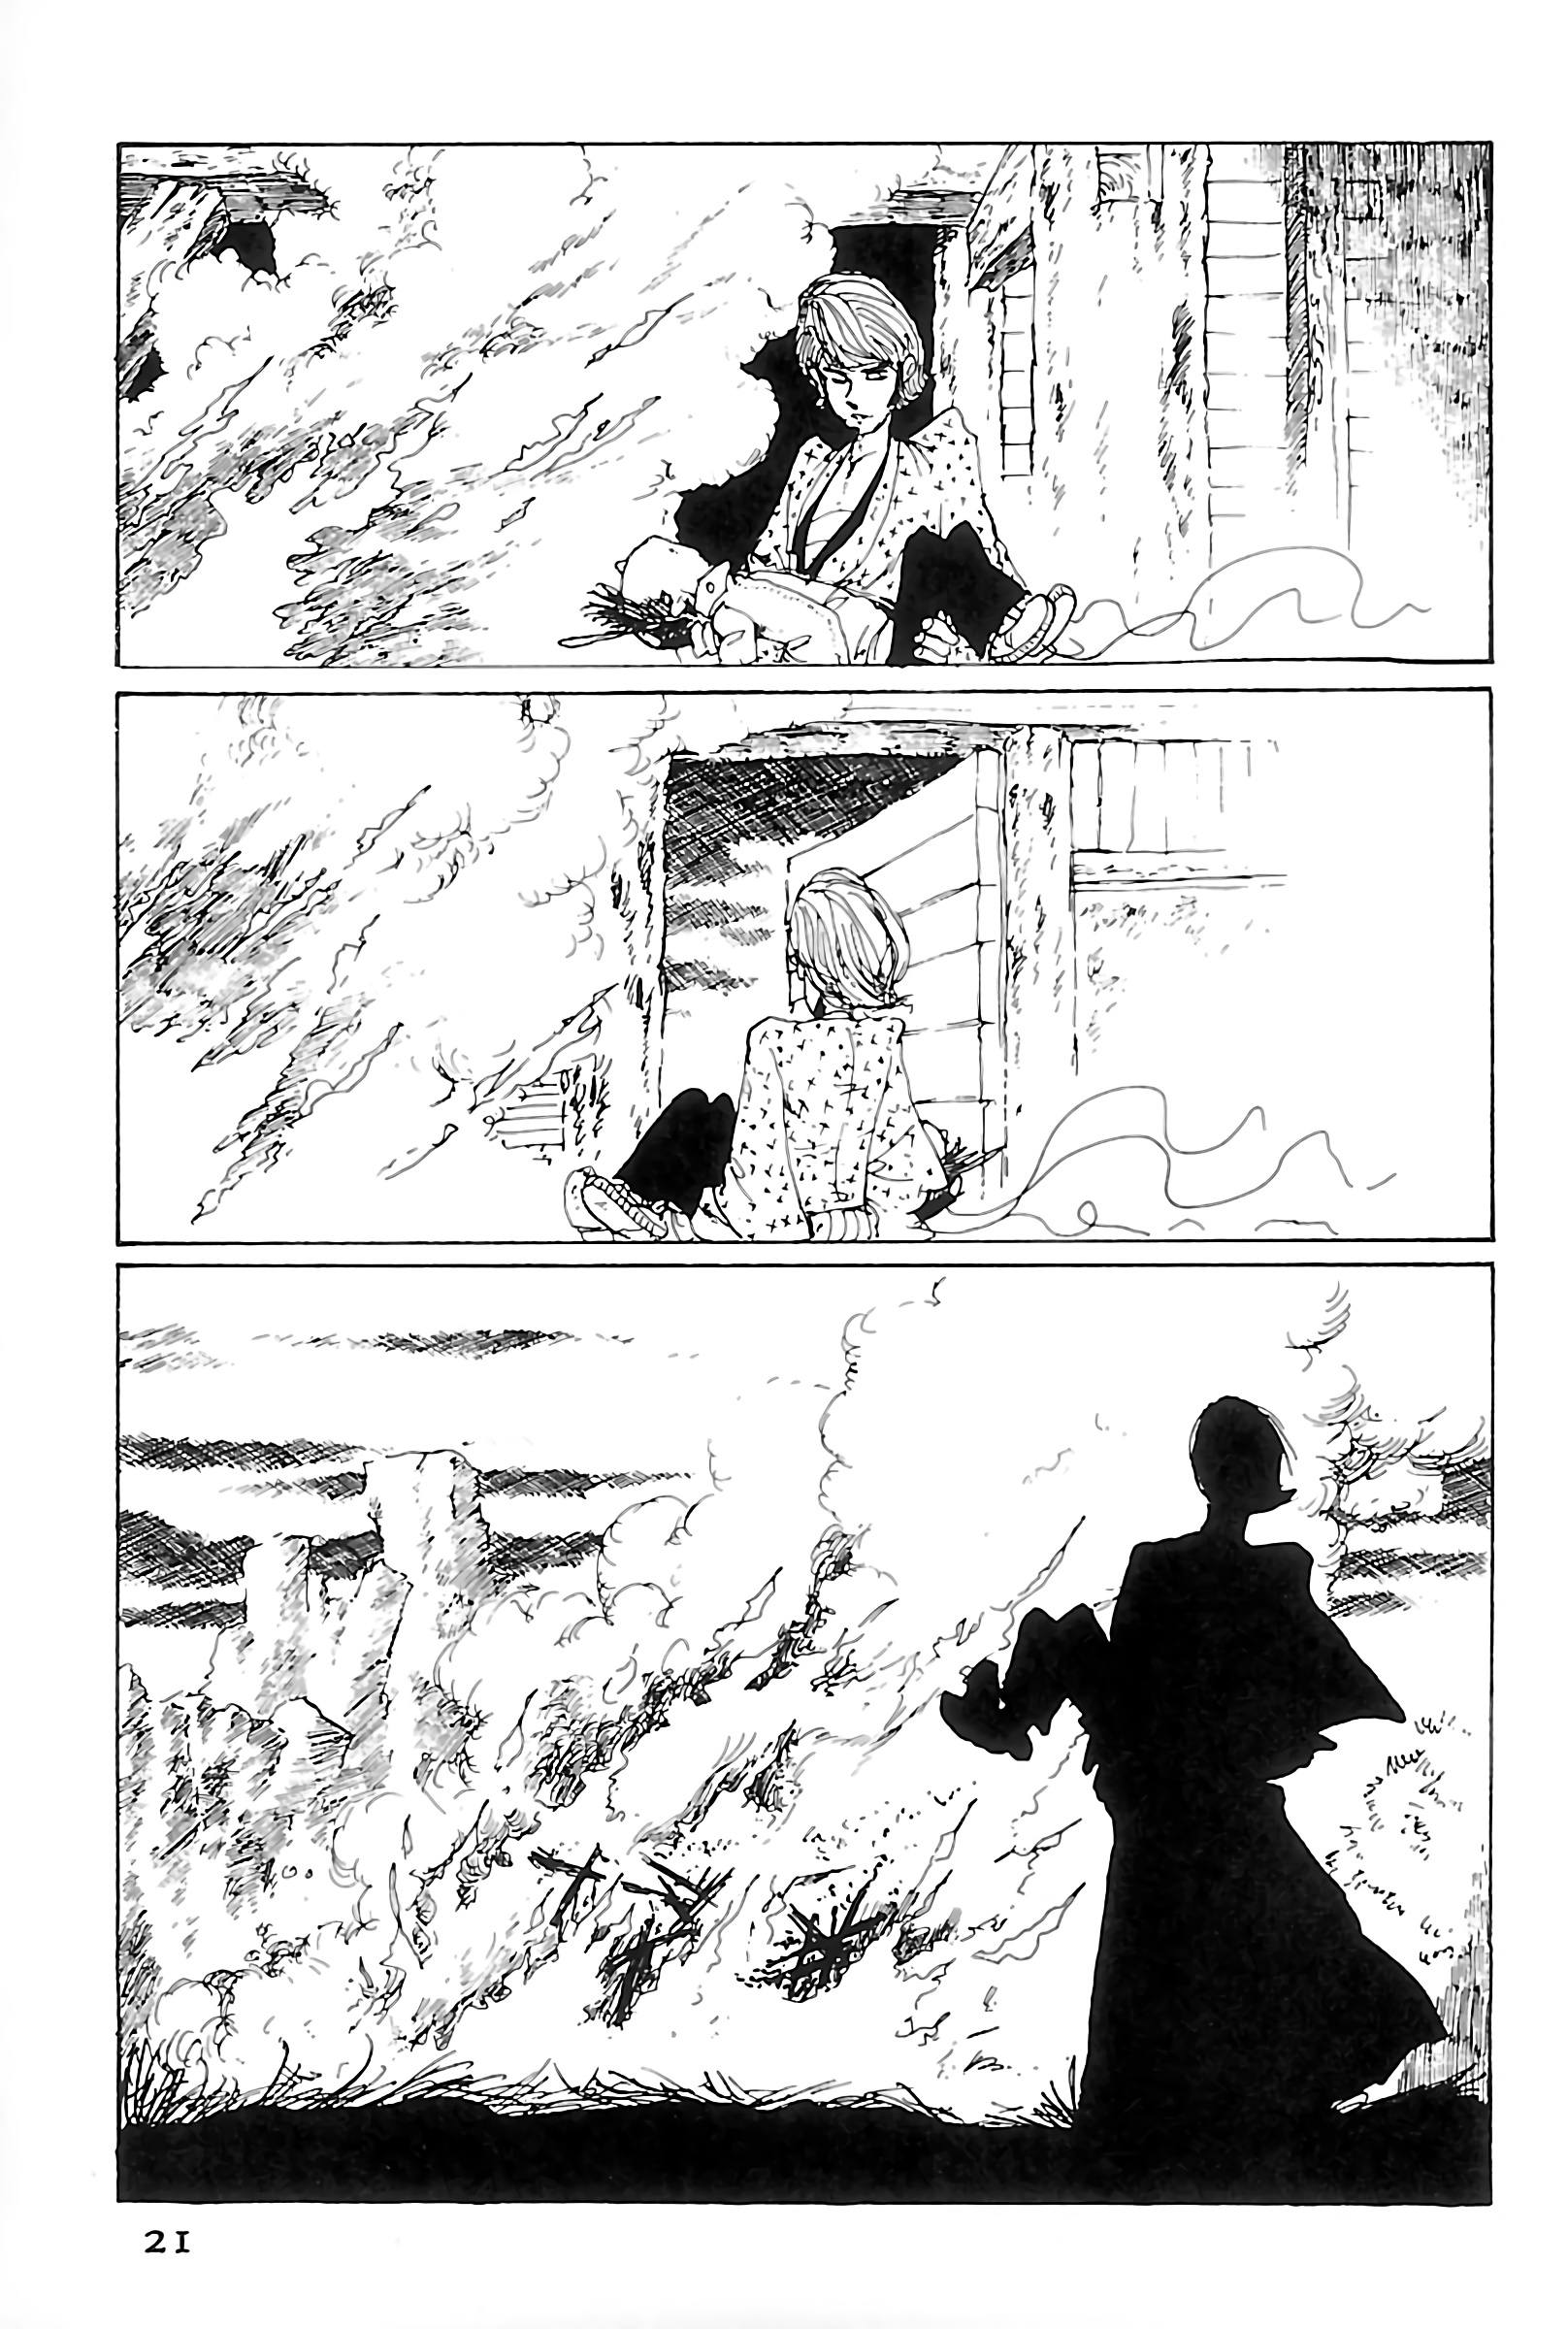 Lupin Iii: World’S Most Wanted Vol.9 Chapter 99